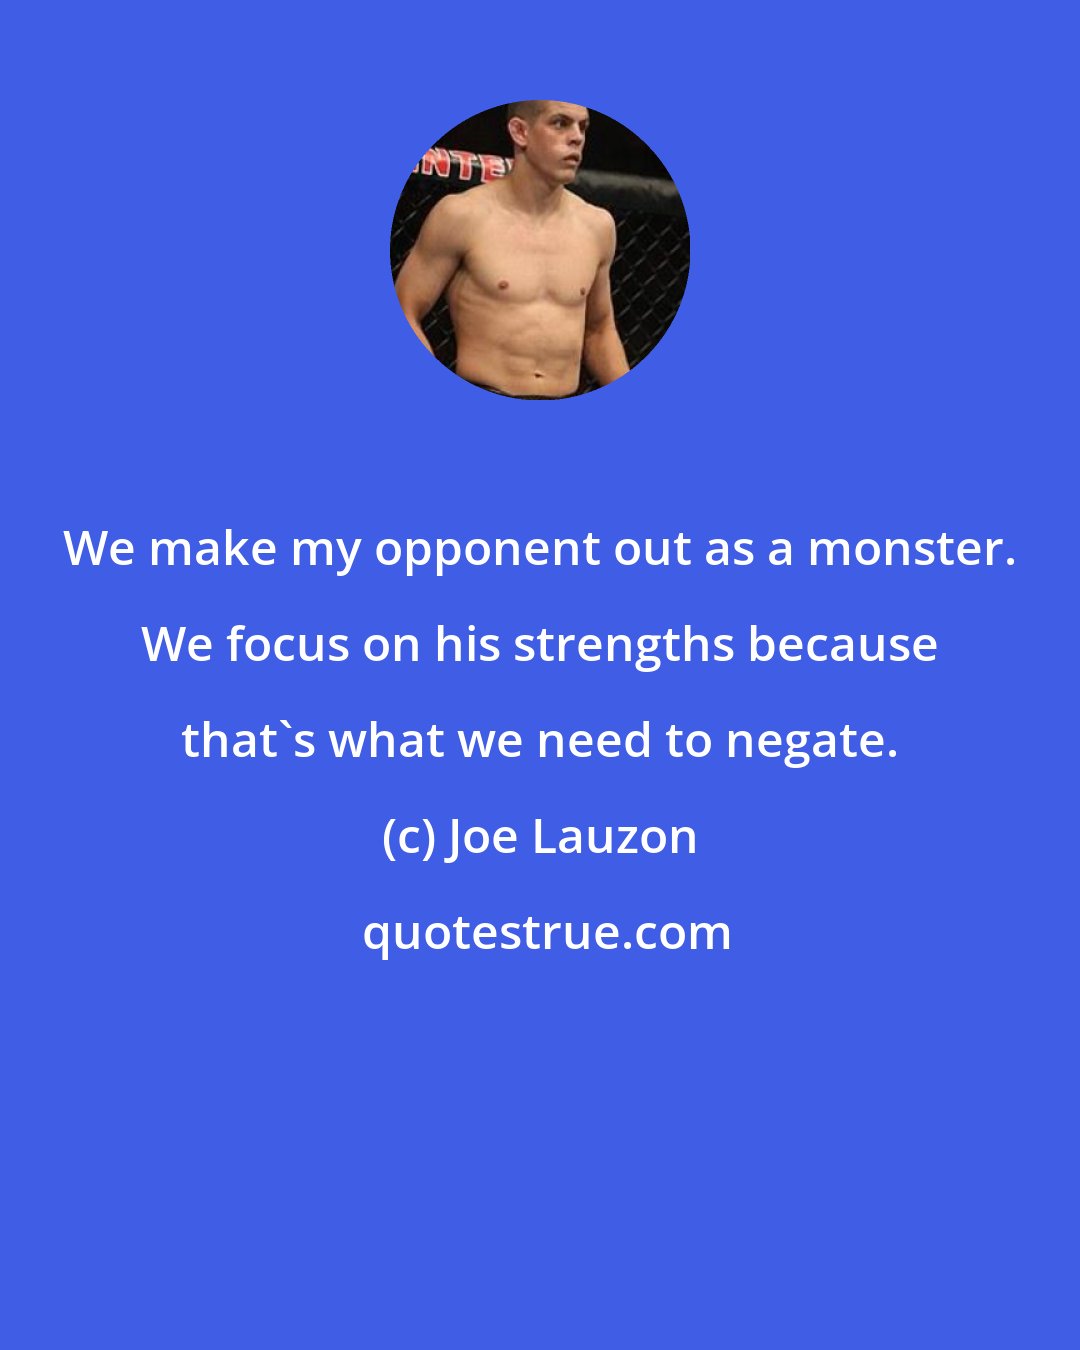 Joe Lauzon: We make my opponent out as a monster. We focus on his strengths because that's what we need to negate.